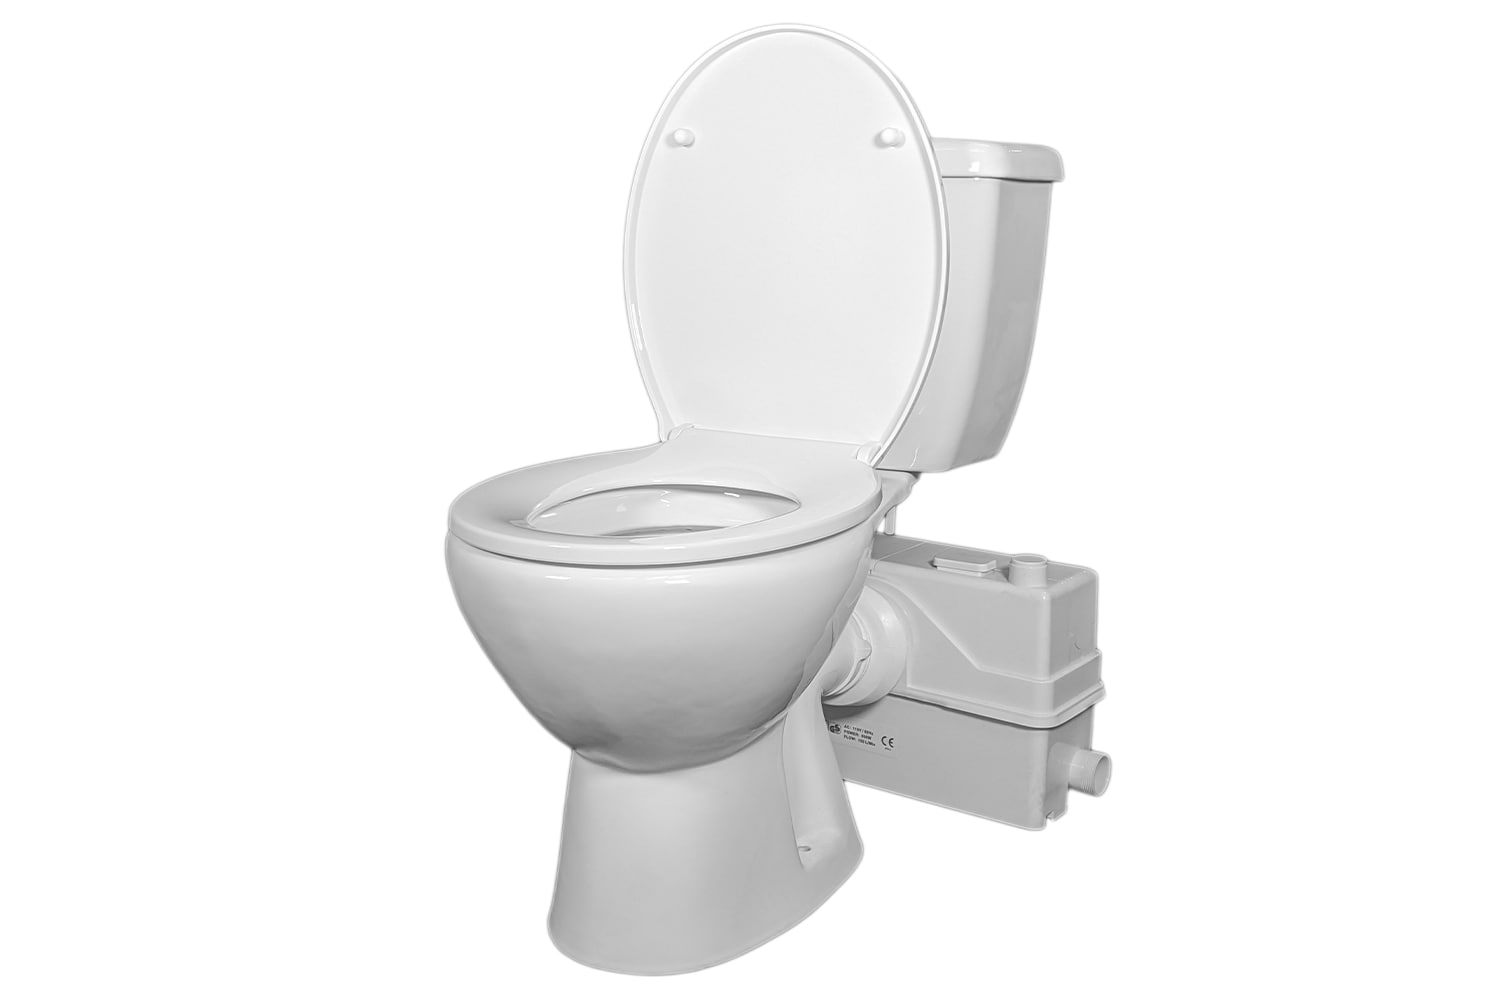 What Can I Use to Clean a Saniflo Toilet? The Full Guide Detailing How to  Clean a Saniflo Toilet